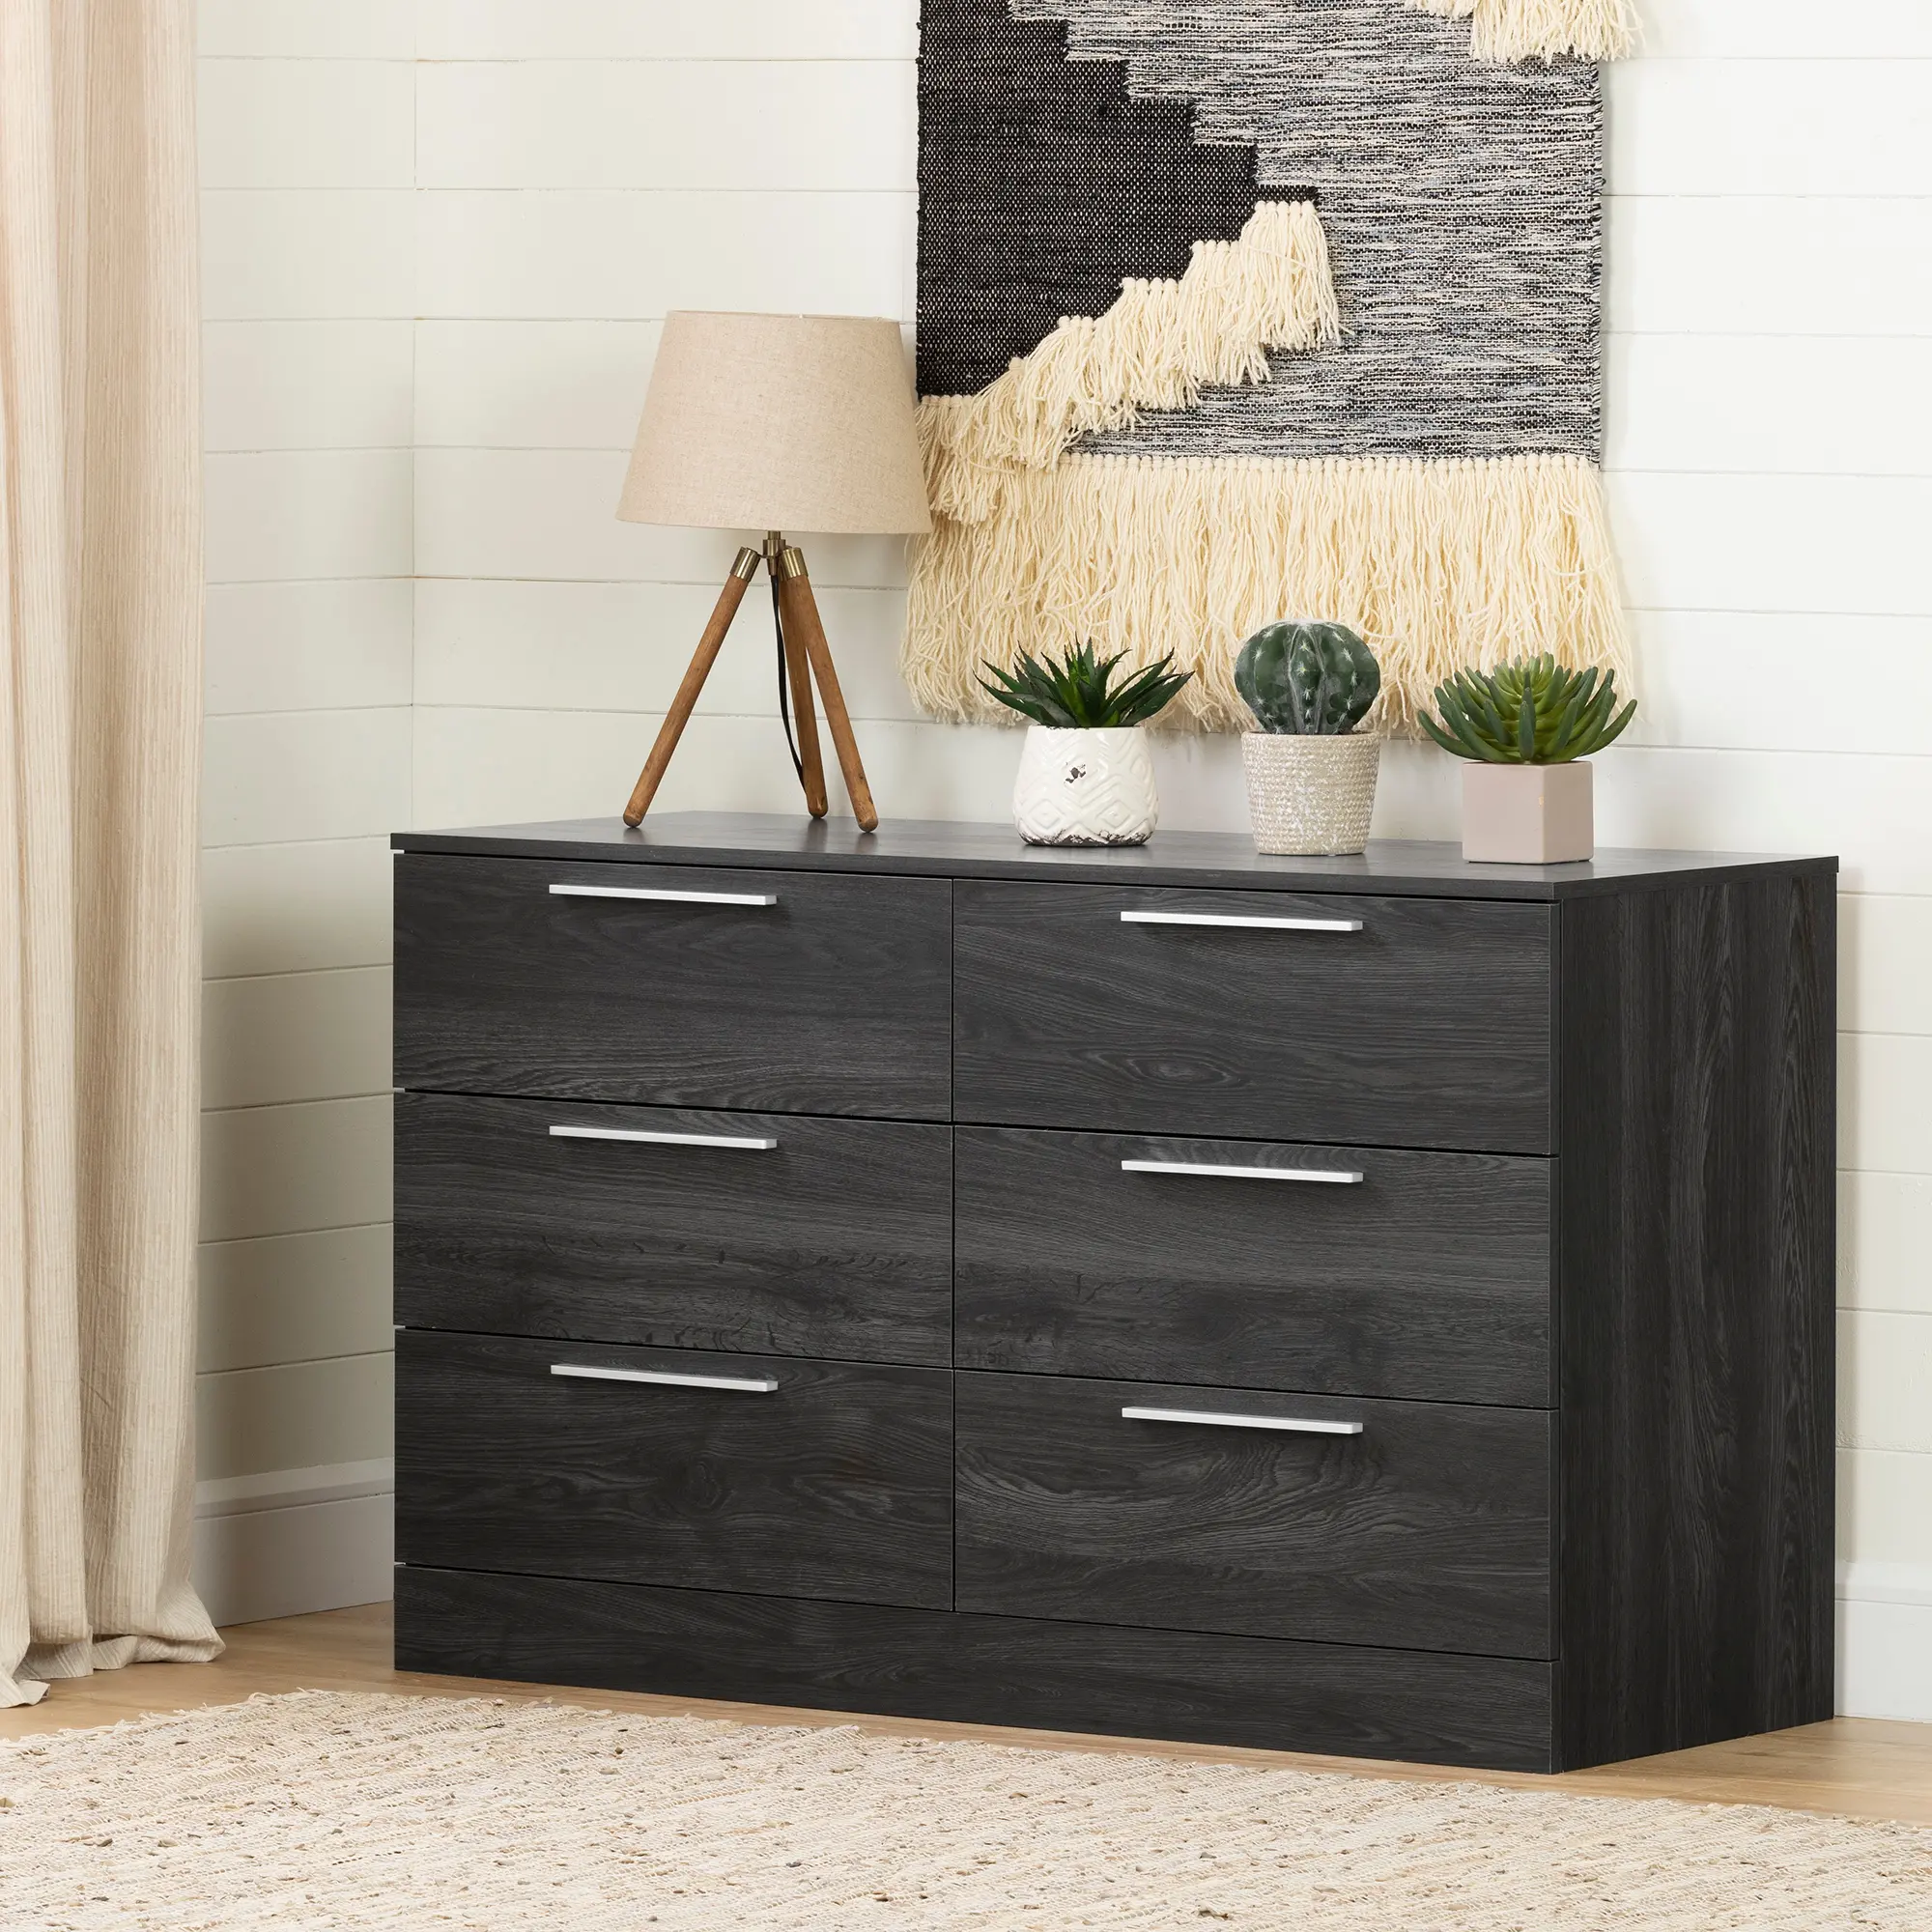 Photos - Dresser / Chests of Drawers South Shore Gray Oak 6-Drawer Dresser - South Shore 12233